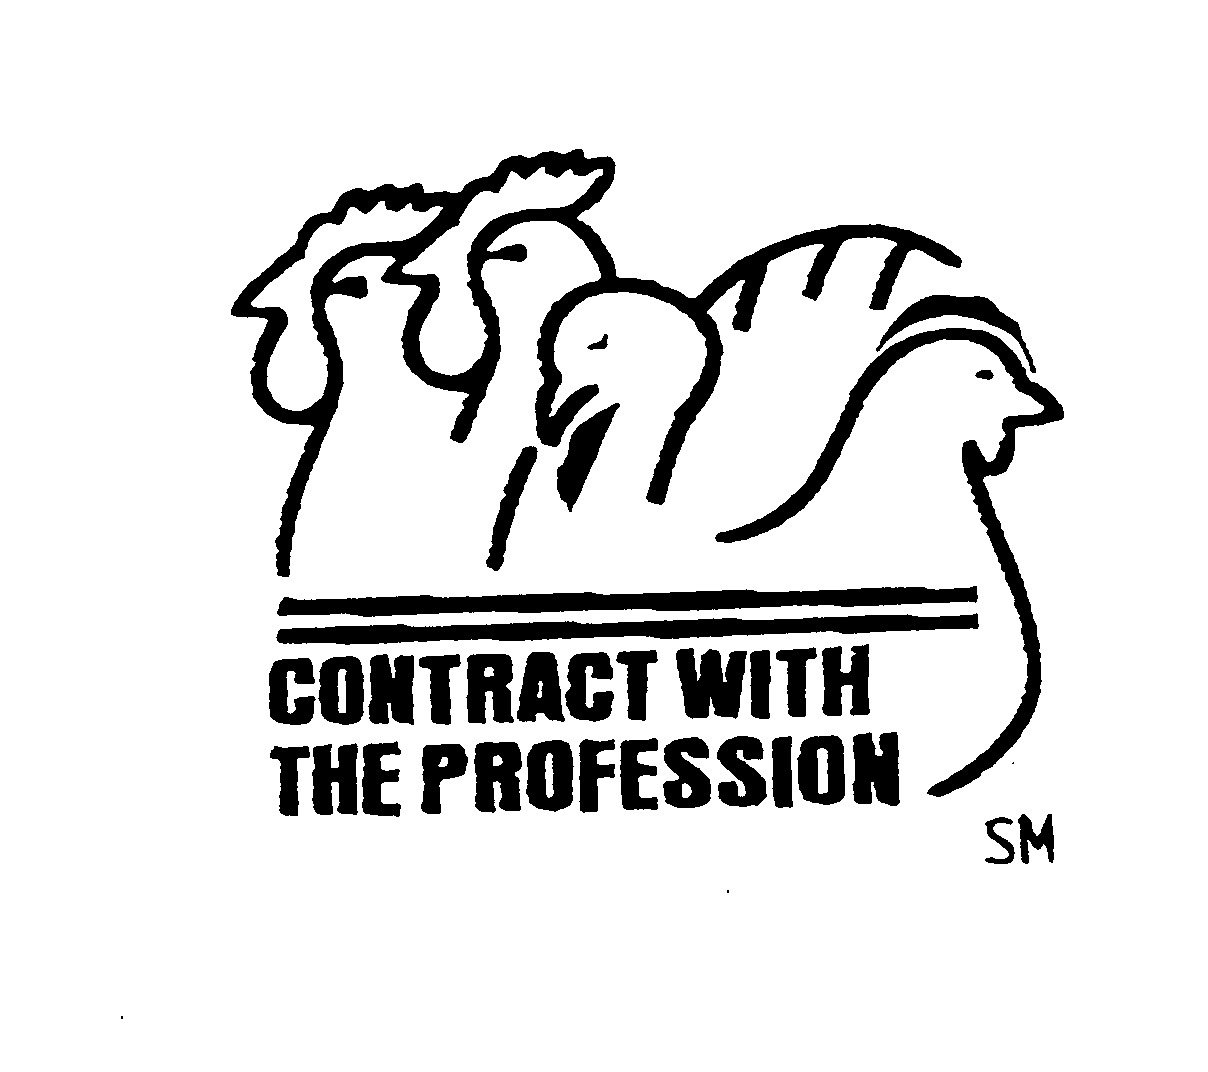  CONTRACT WITH THE PROFESSION